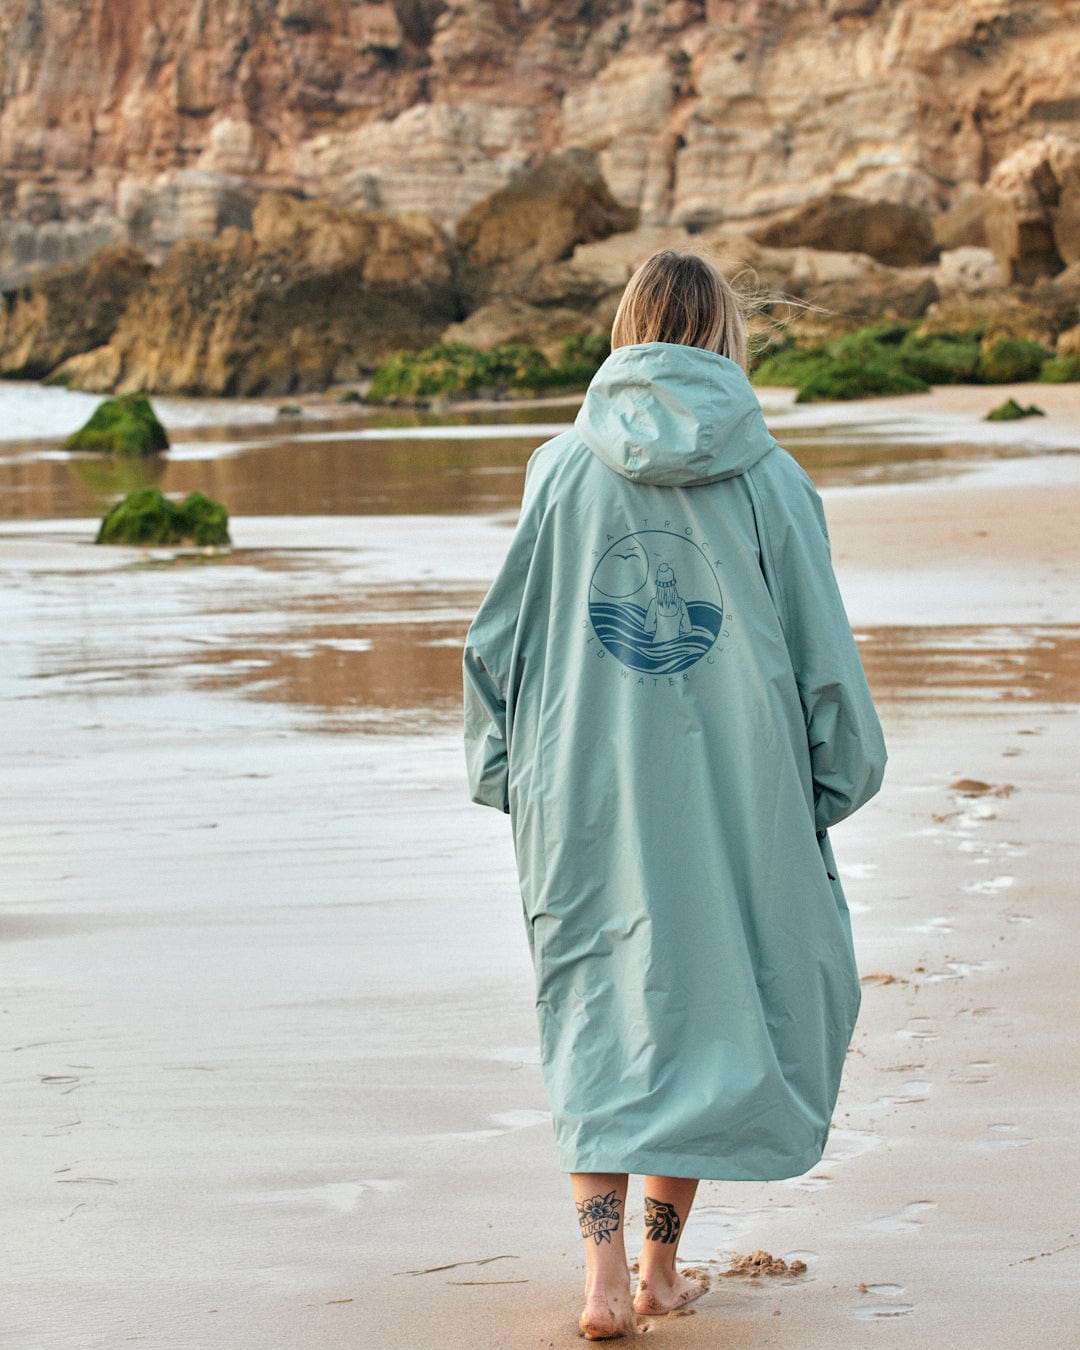 Person in a Saltrock Recycled Four Seasons Changing Robe - Light Green walking on a sandy beach toward rocky cliffs.